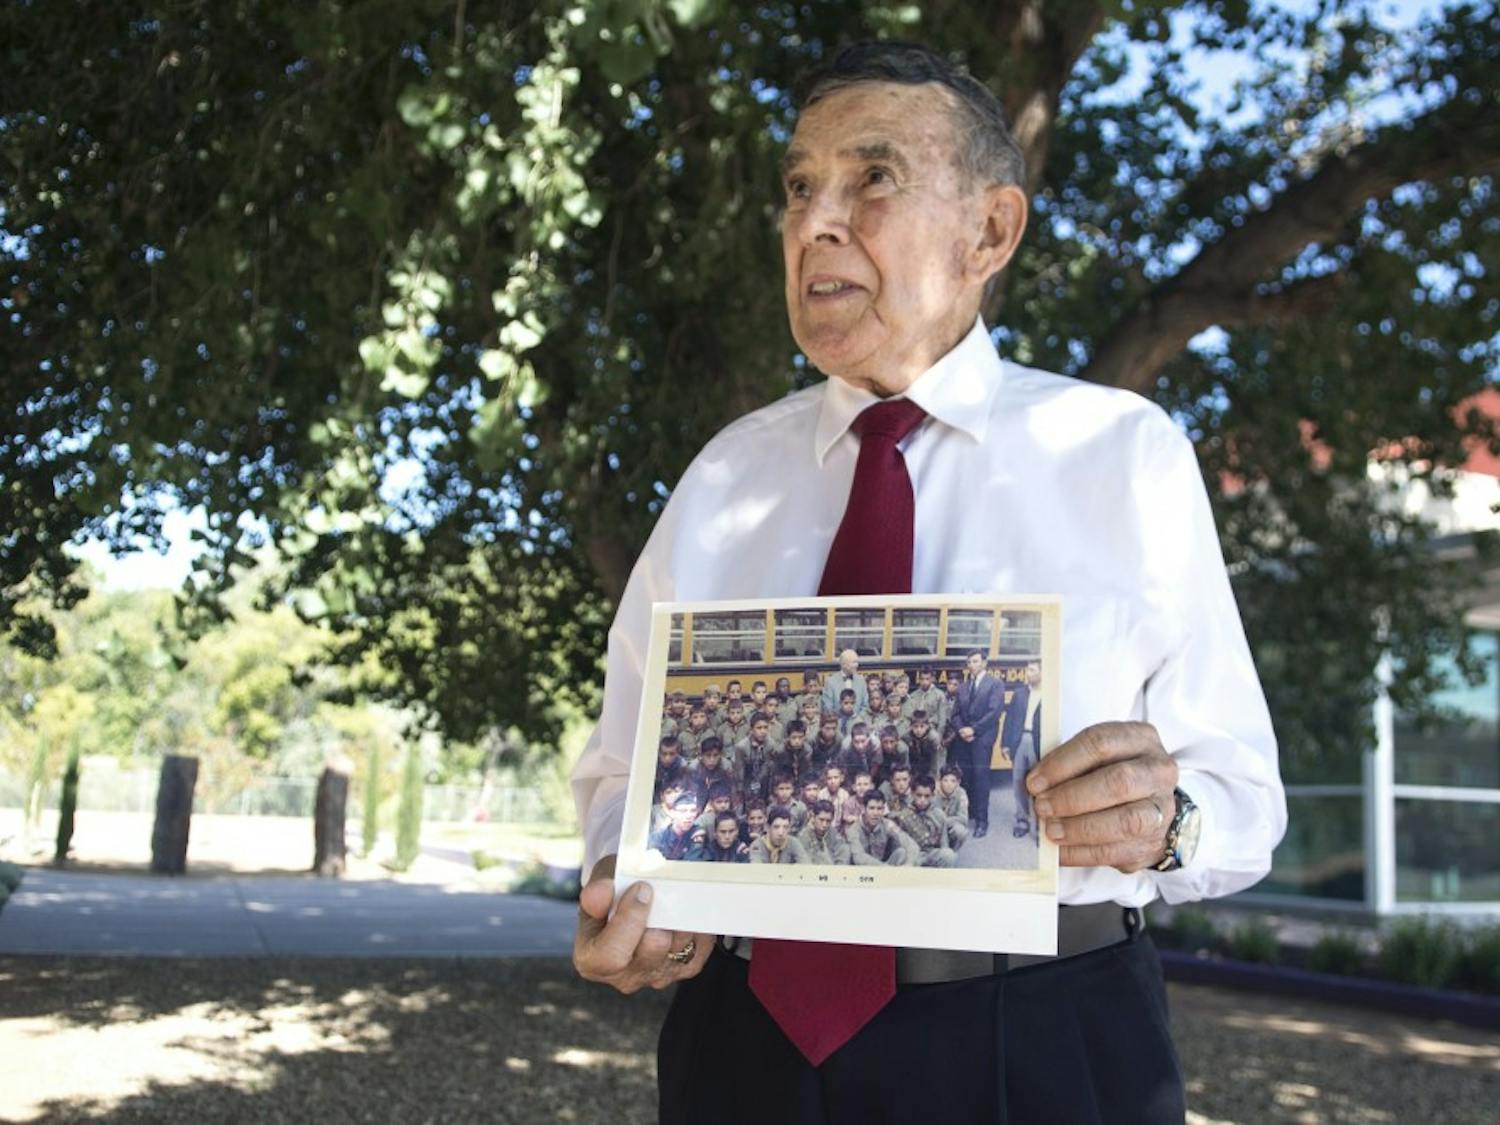 	Desi Baca holds up a photograph of Sgt. Pete Padilla and Pfc. Manuel Mora with other Boy Scouts at the National Hispanic Cultural Center on Aug. 11. Baca was scout leader at the time that Padilla and Mora were members and was present when the appropriation of funds for the memorial were purposed.